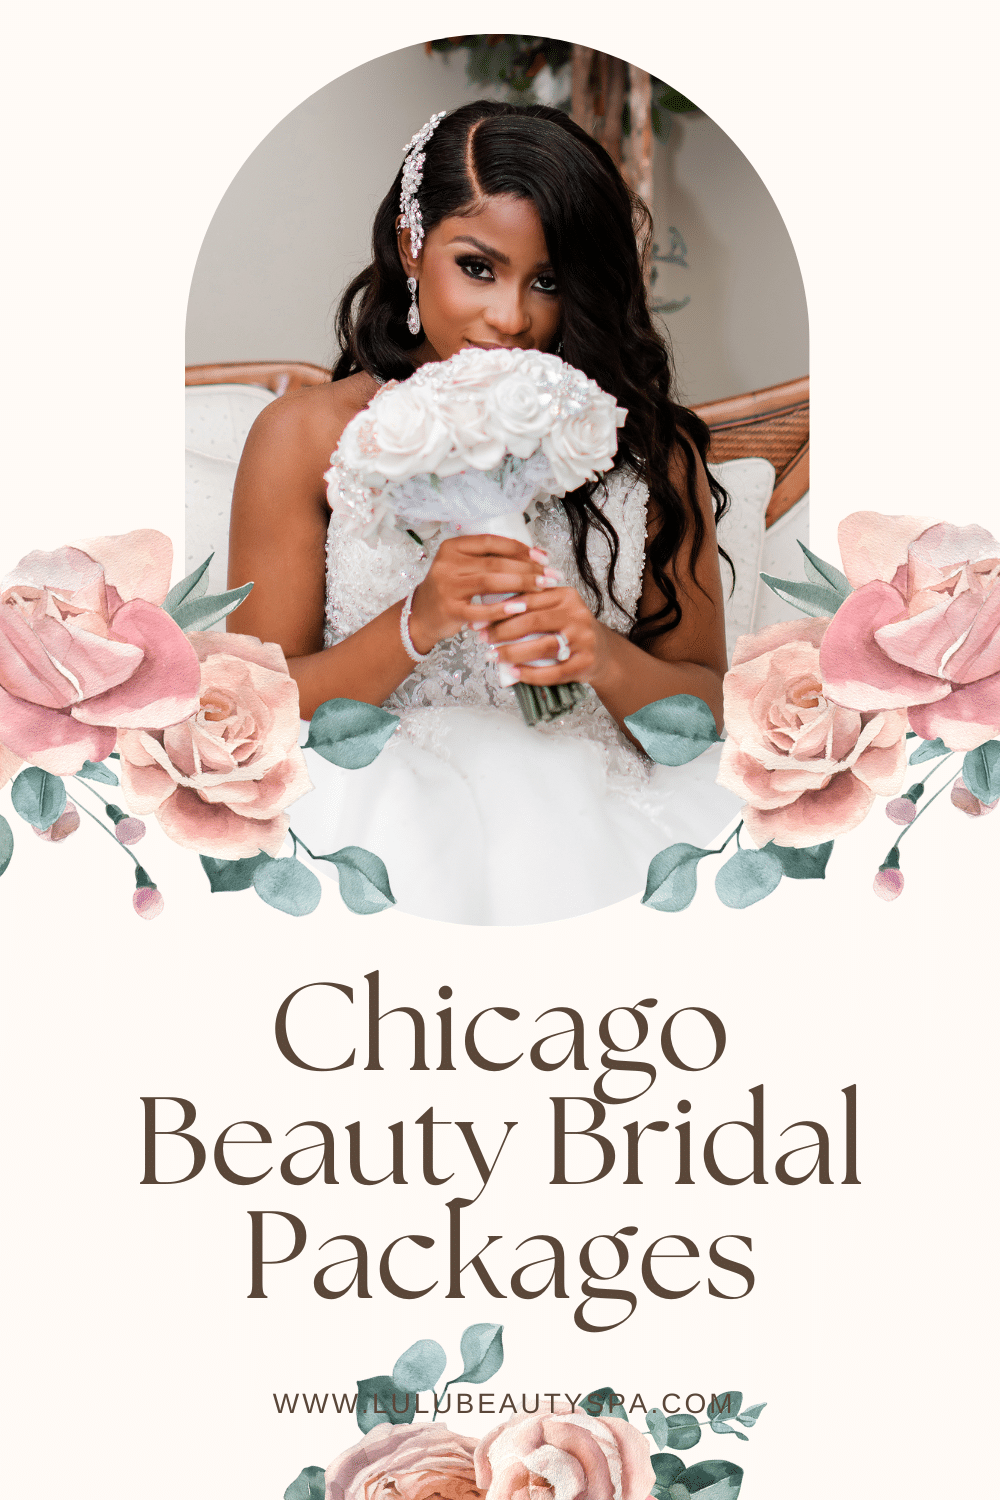 Chicago Beauty Bridal Packages everything